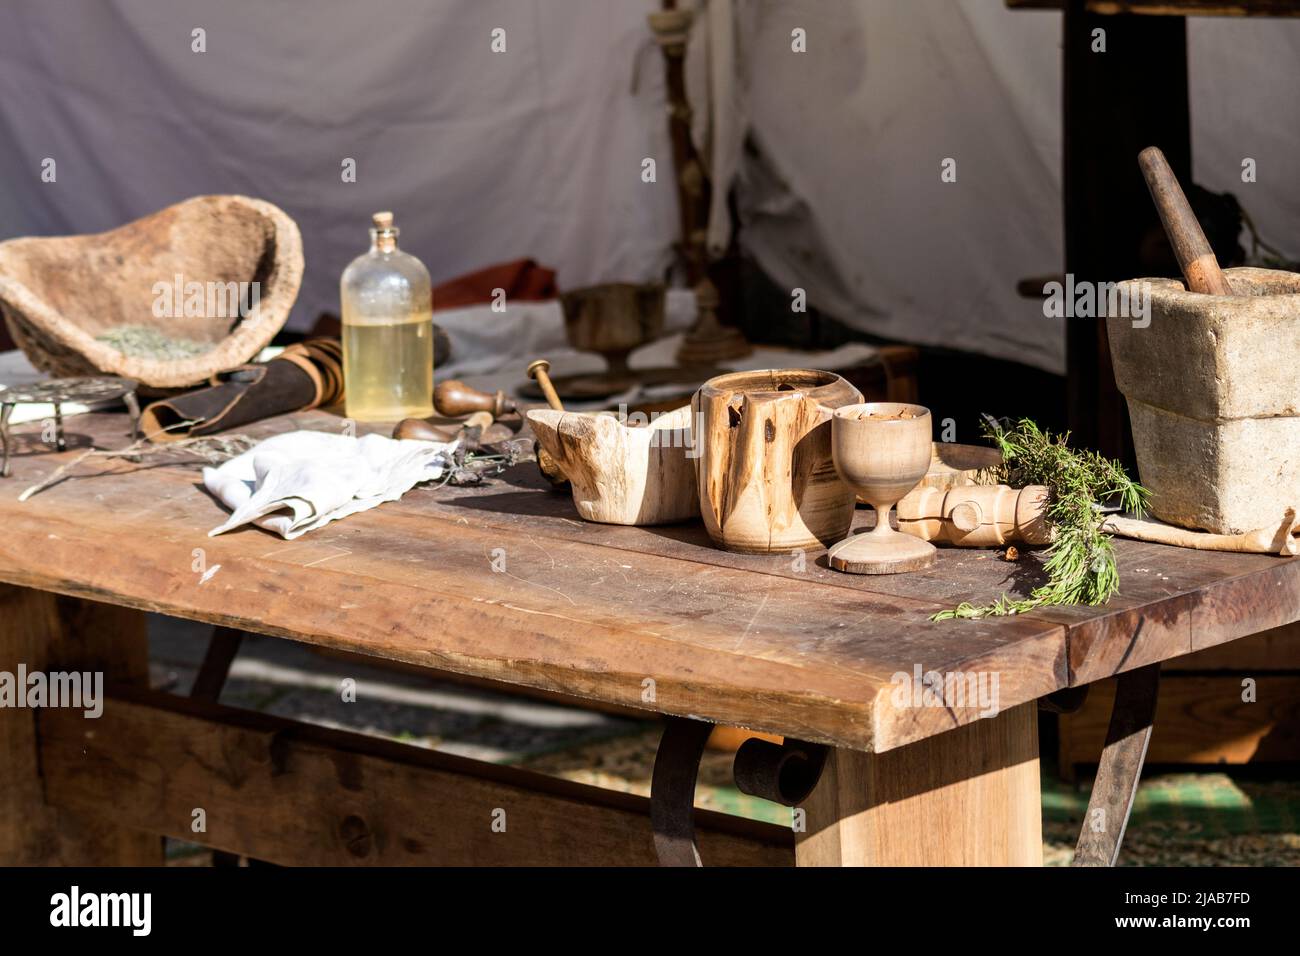 Ancient or vintage handmade tools and wood cups from Roman times. Braga Romana event in North Portugal. Recreational fairs from ancient periods. Stock Photo